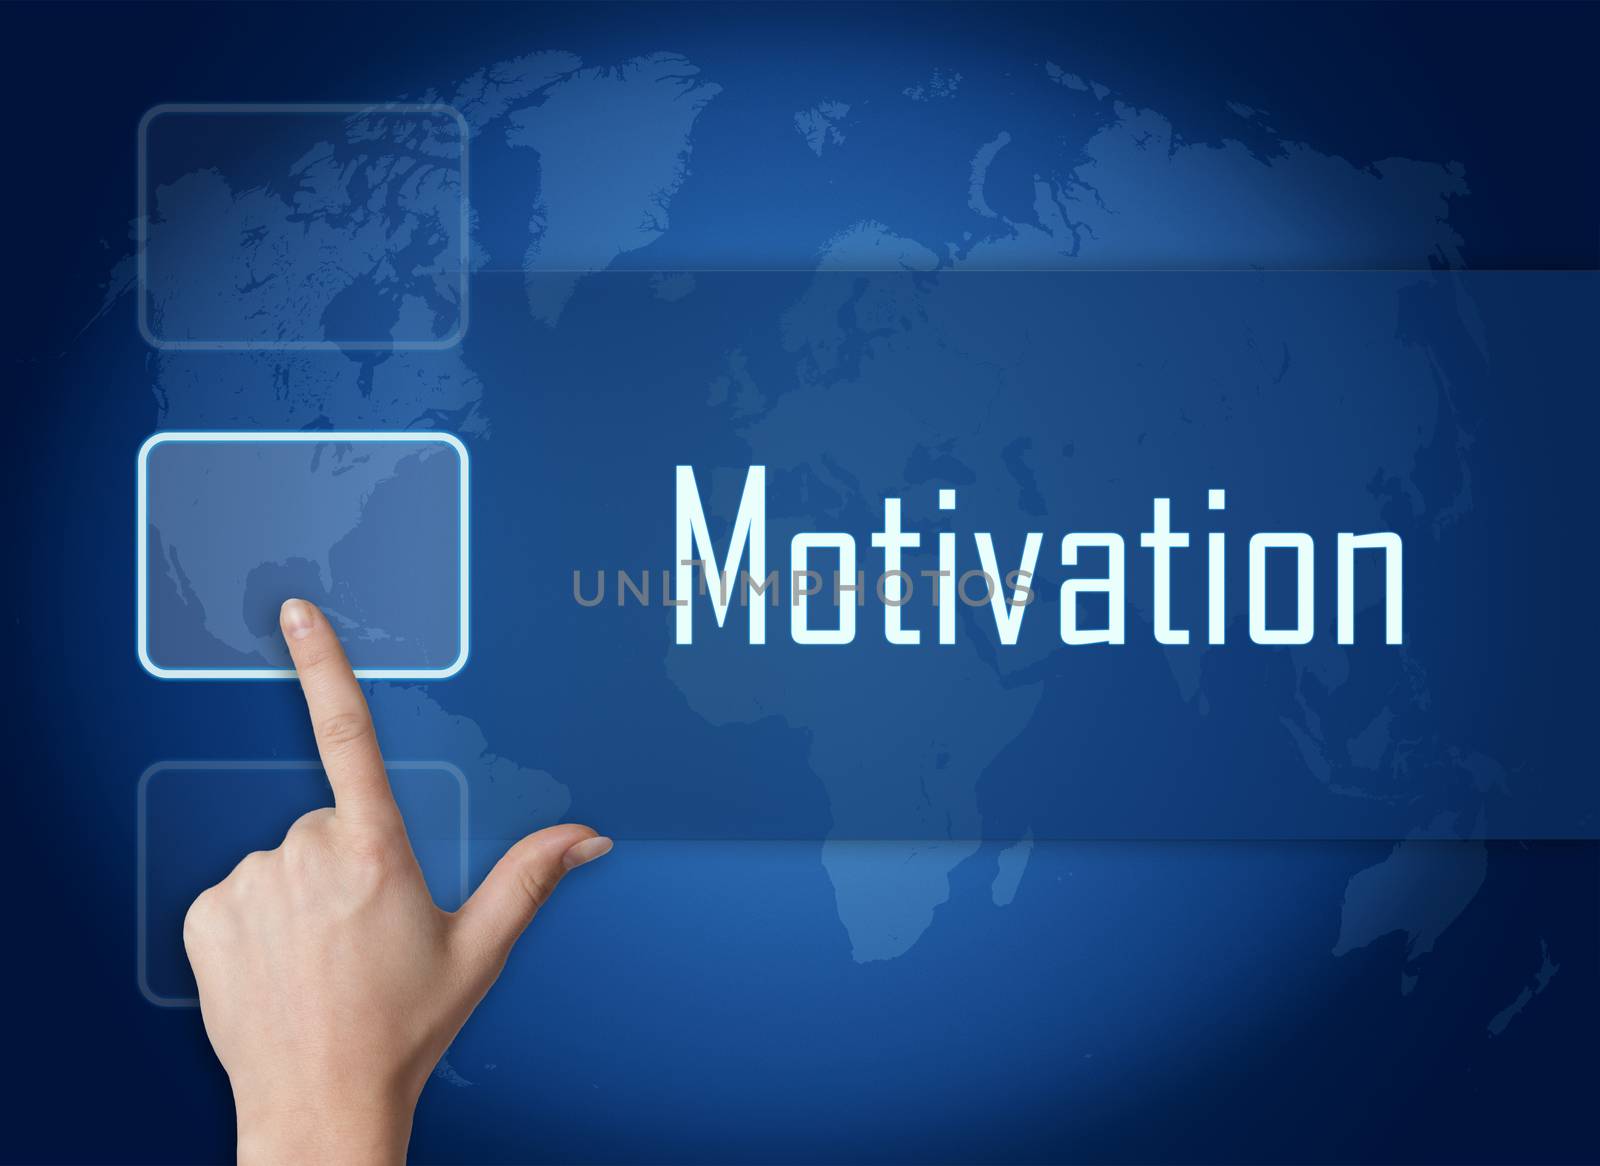 Motivation concept with interface and world map on blue background